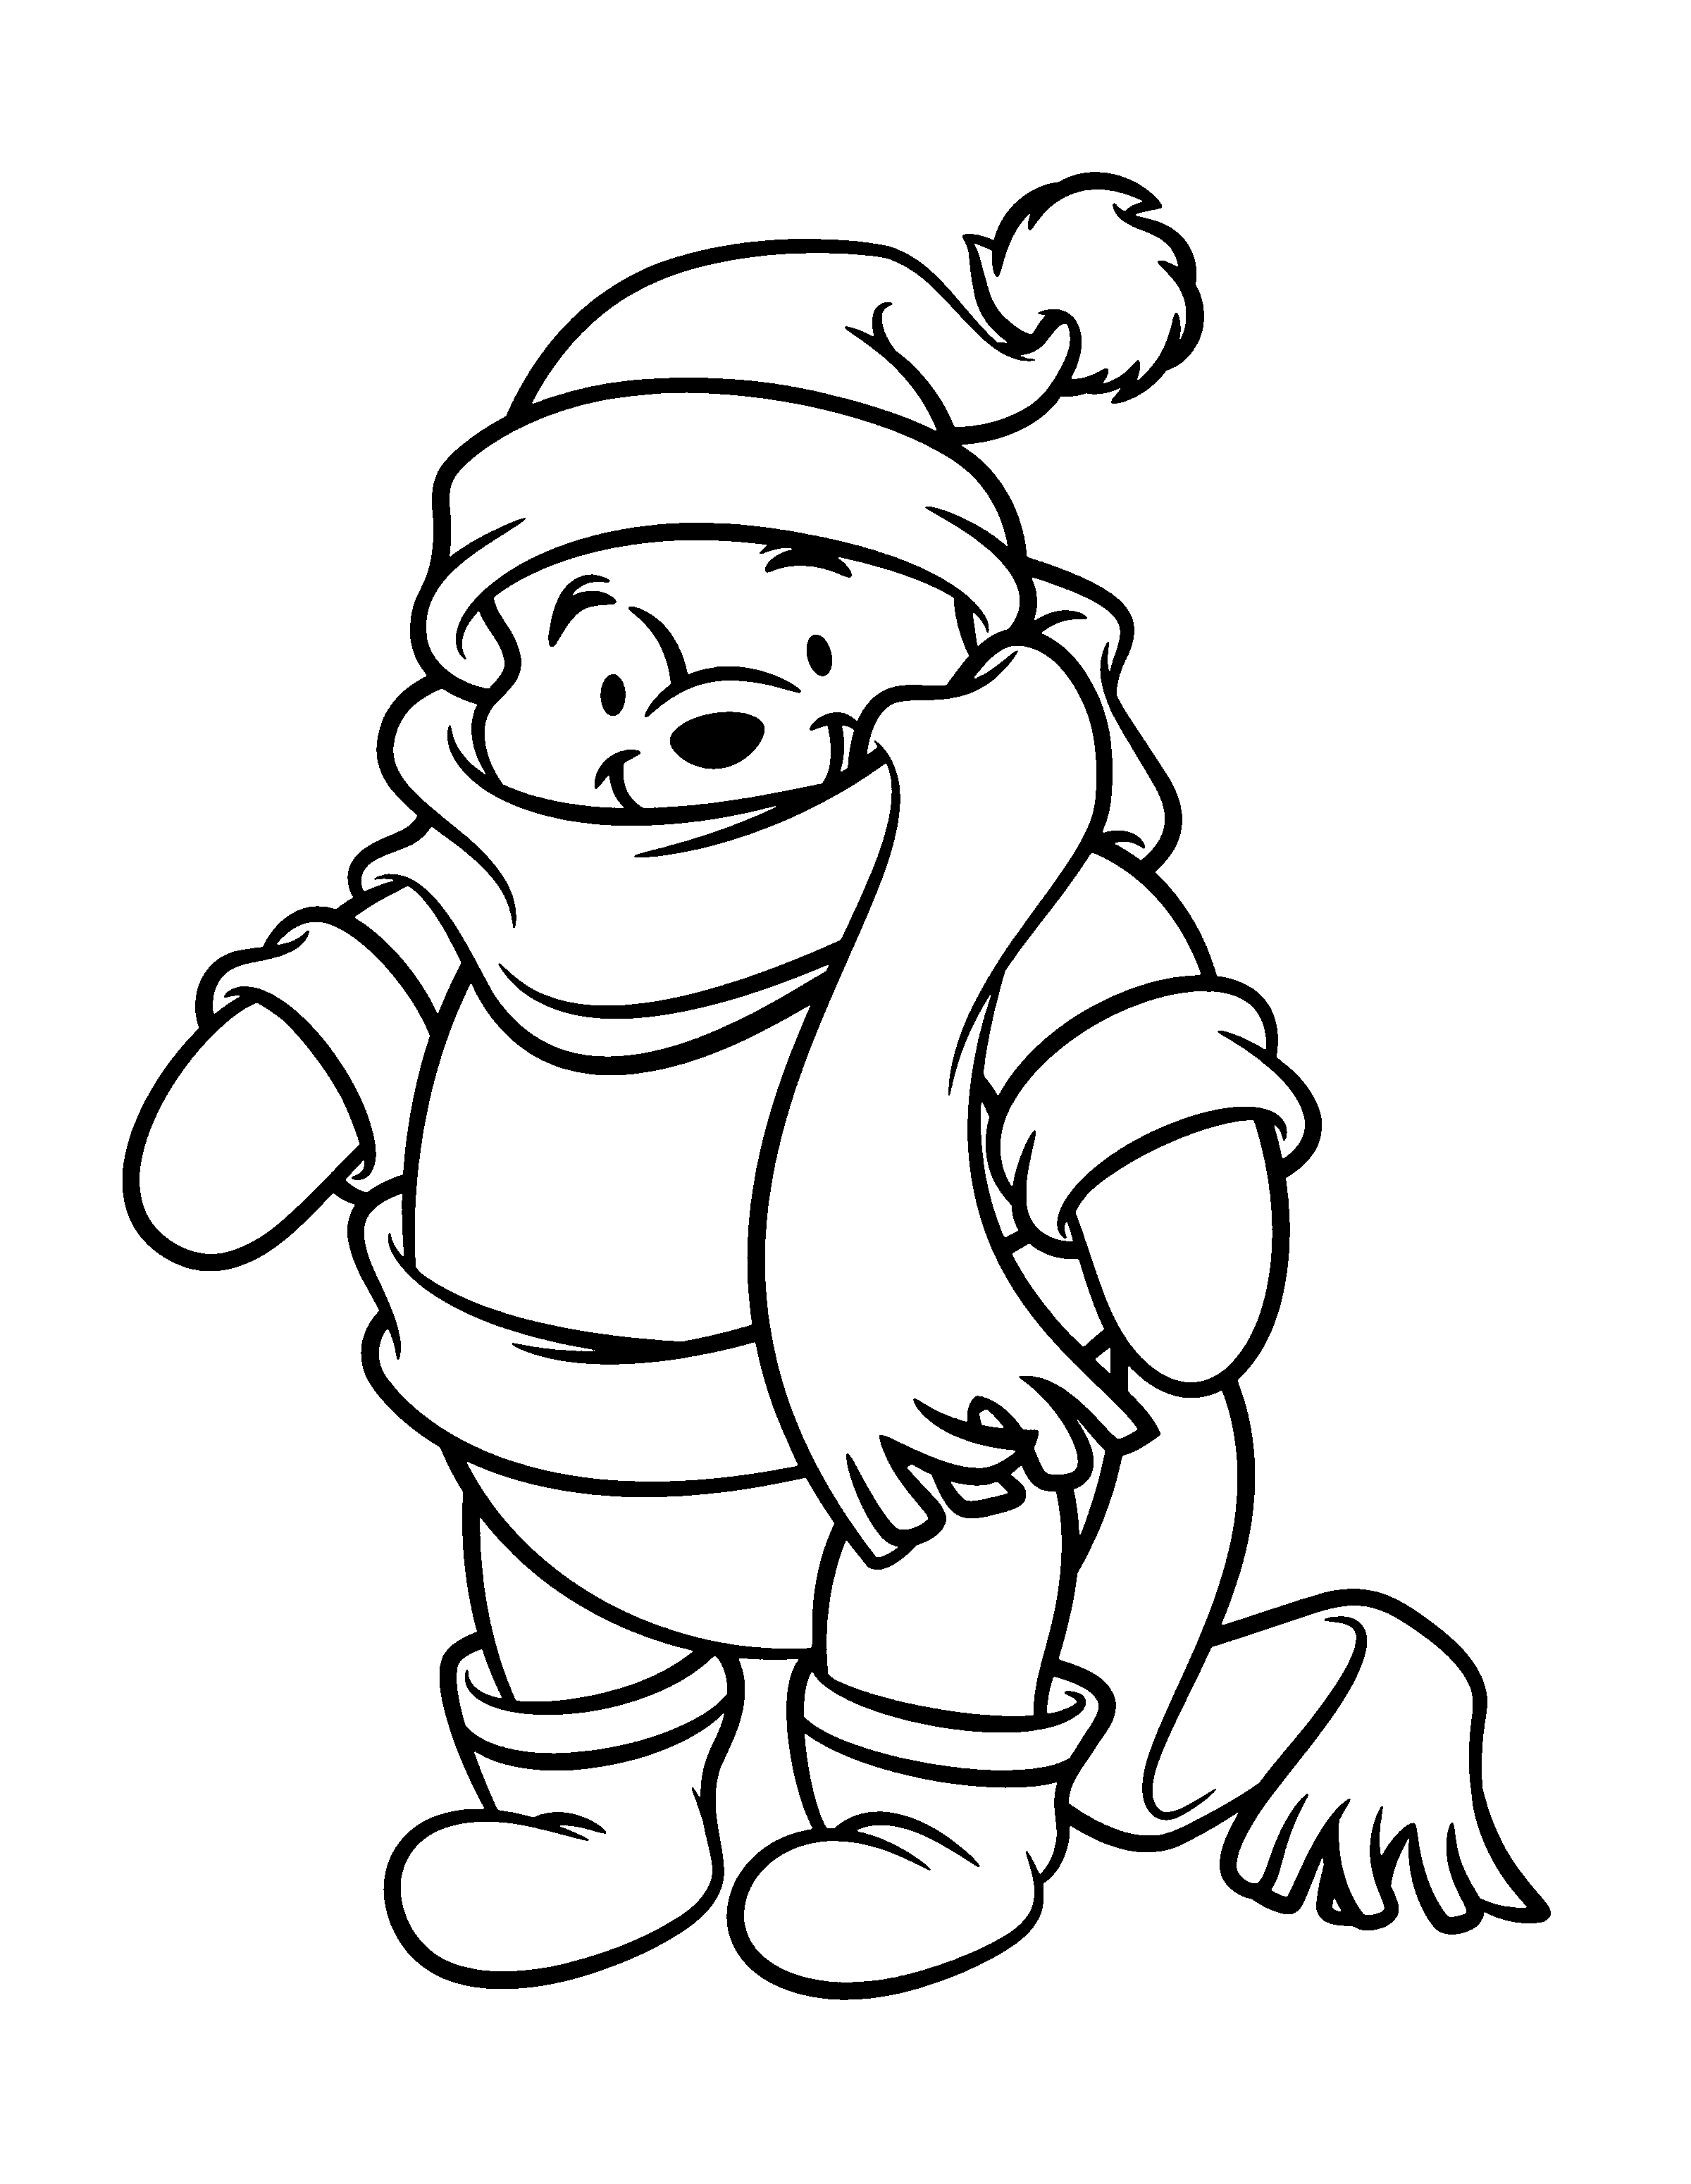 pooh in winter clothes coloring page kids